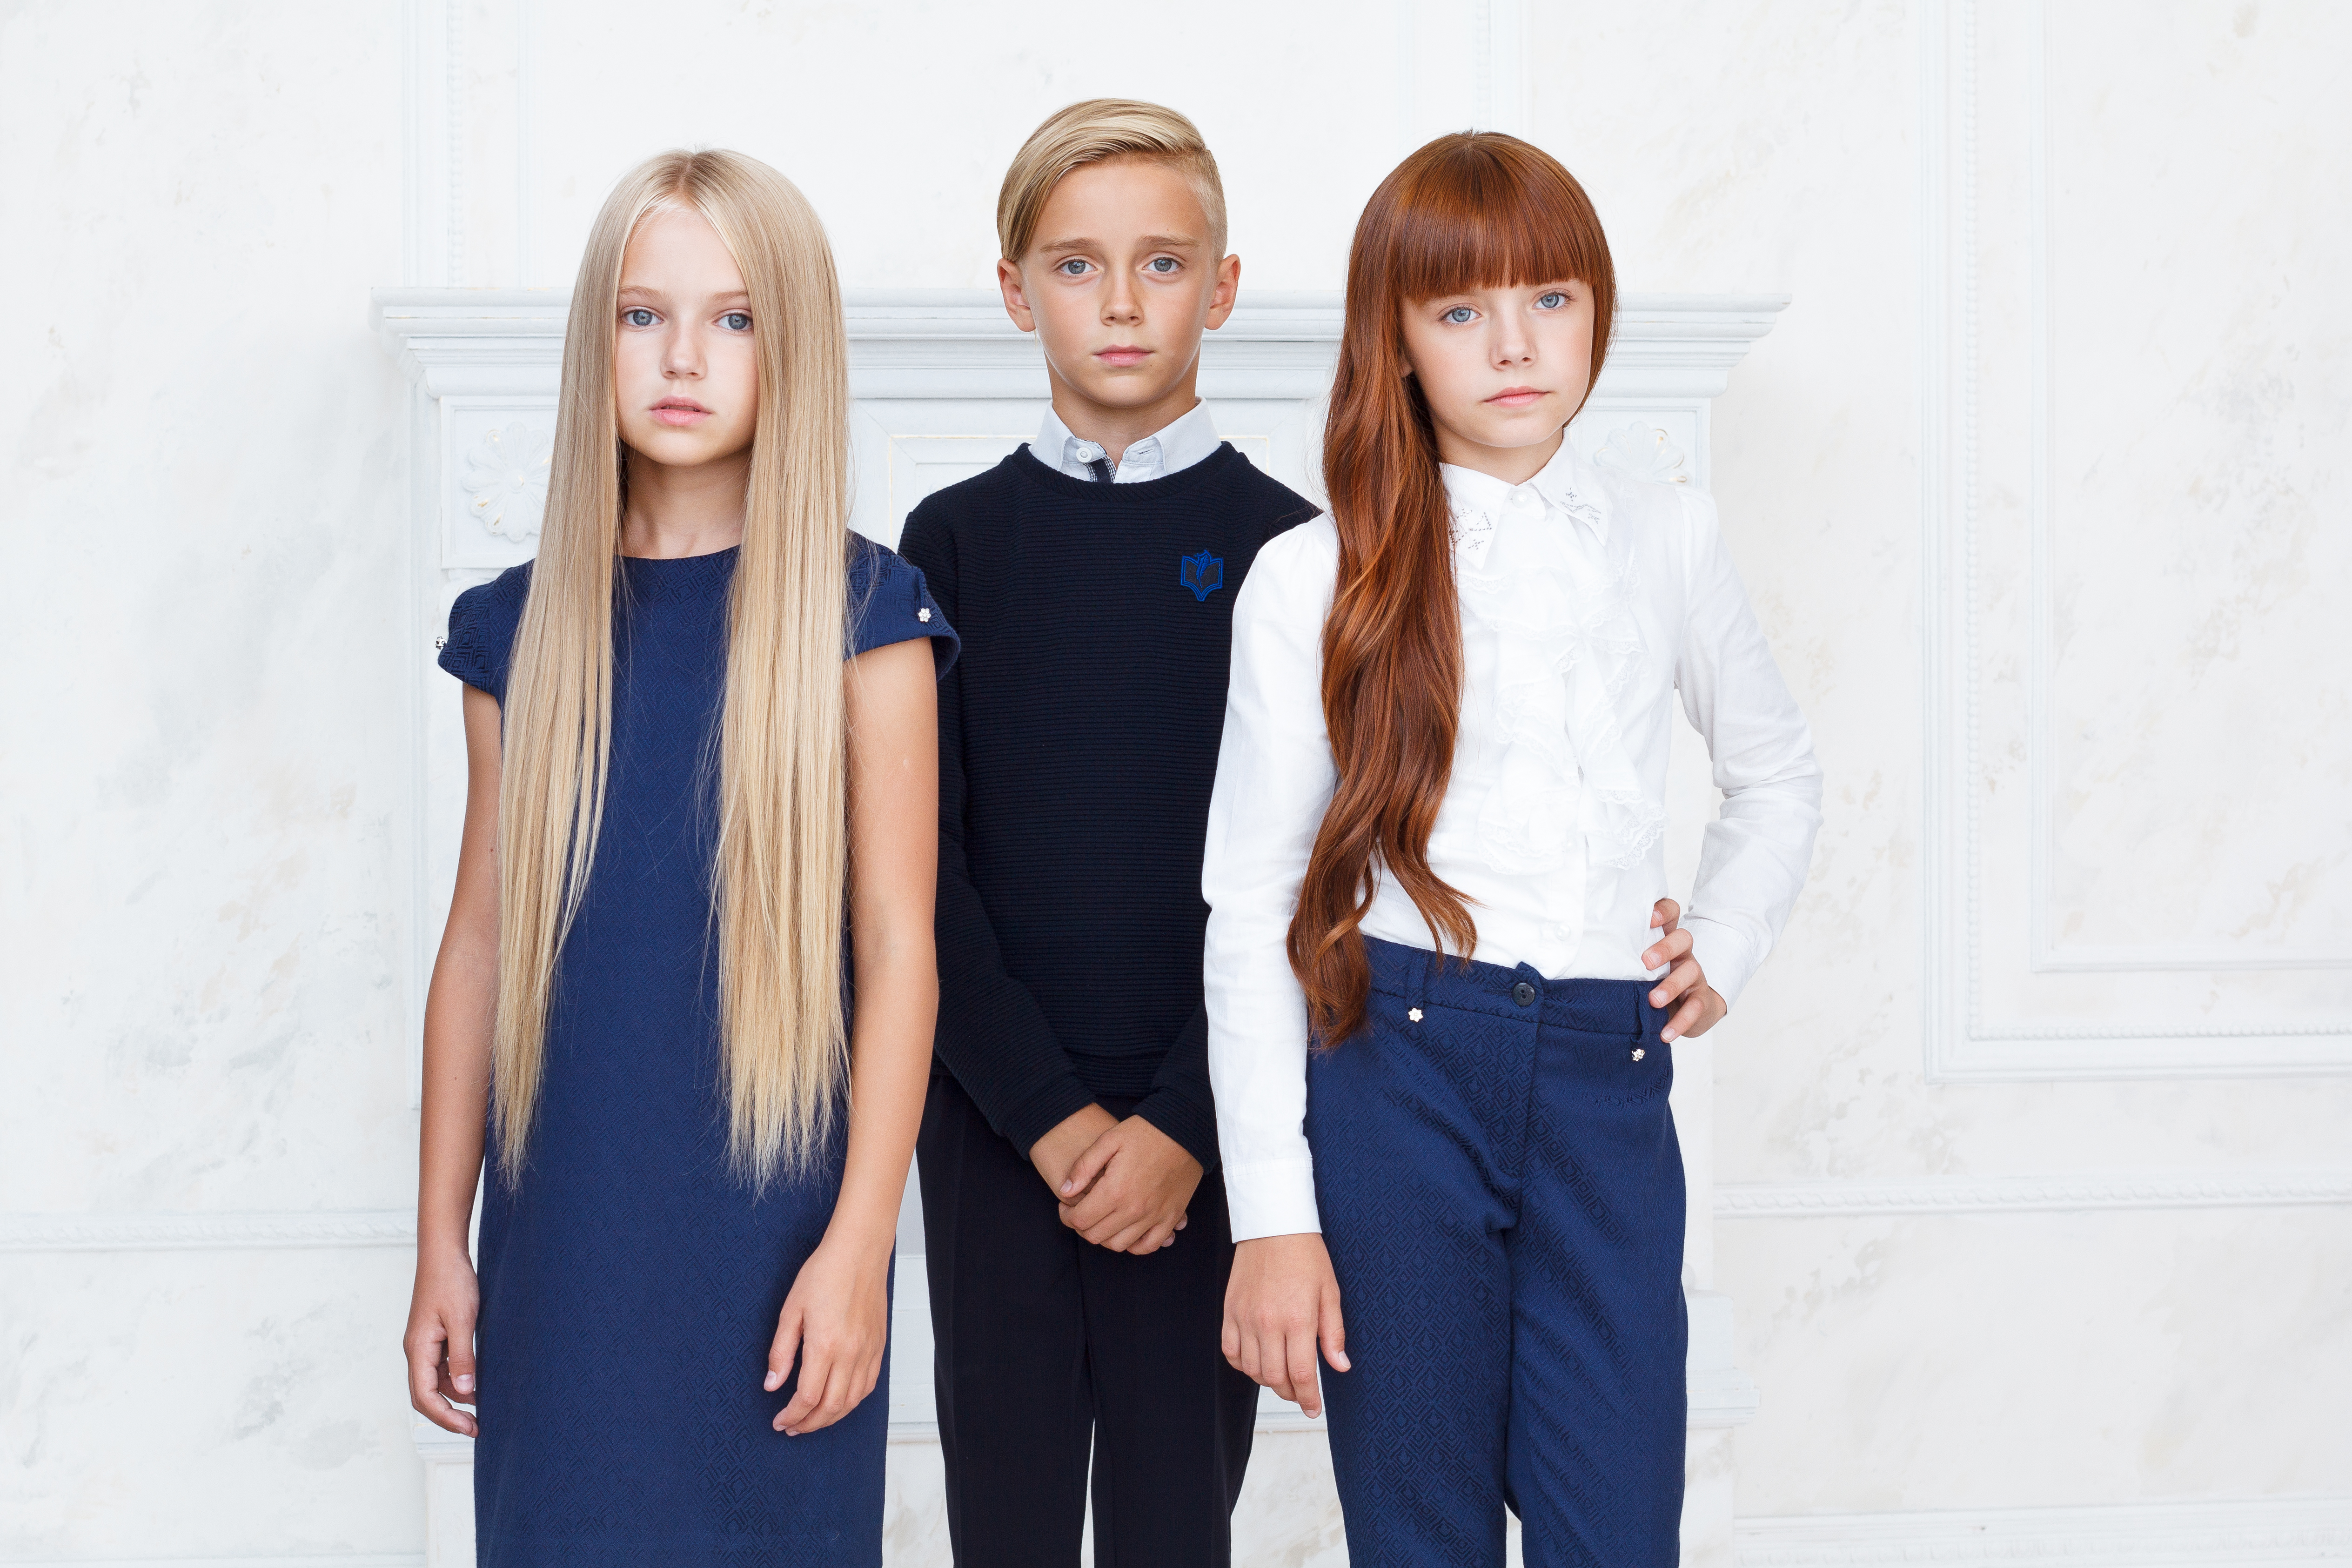 BTK group presented a new collection of a school uniform at the CJF-Children’s fashion exhibition